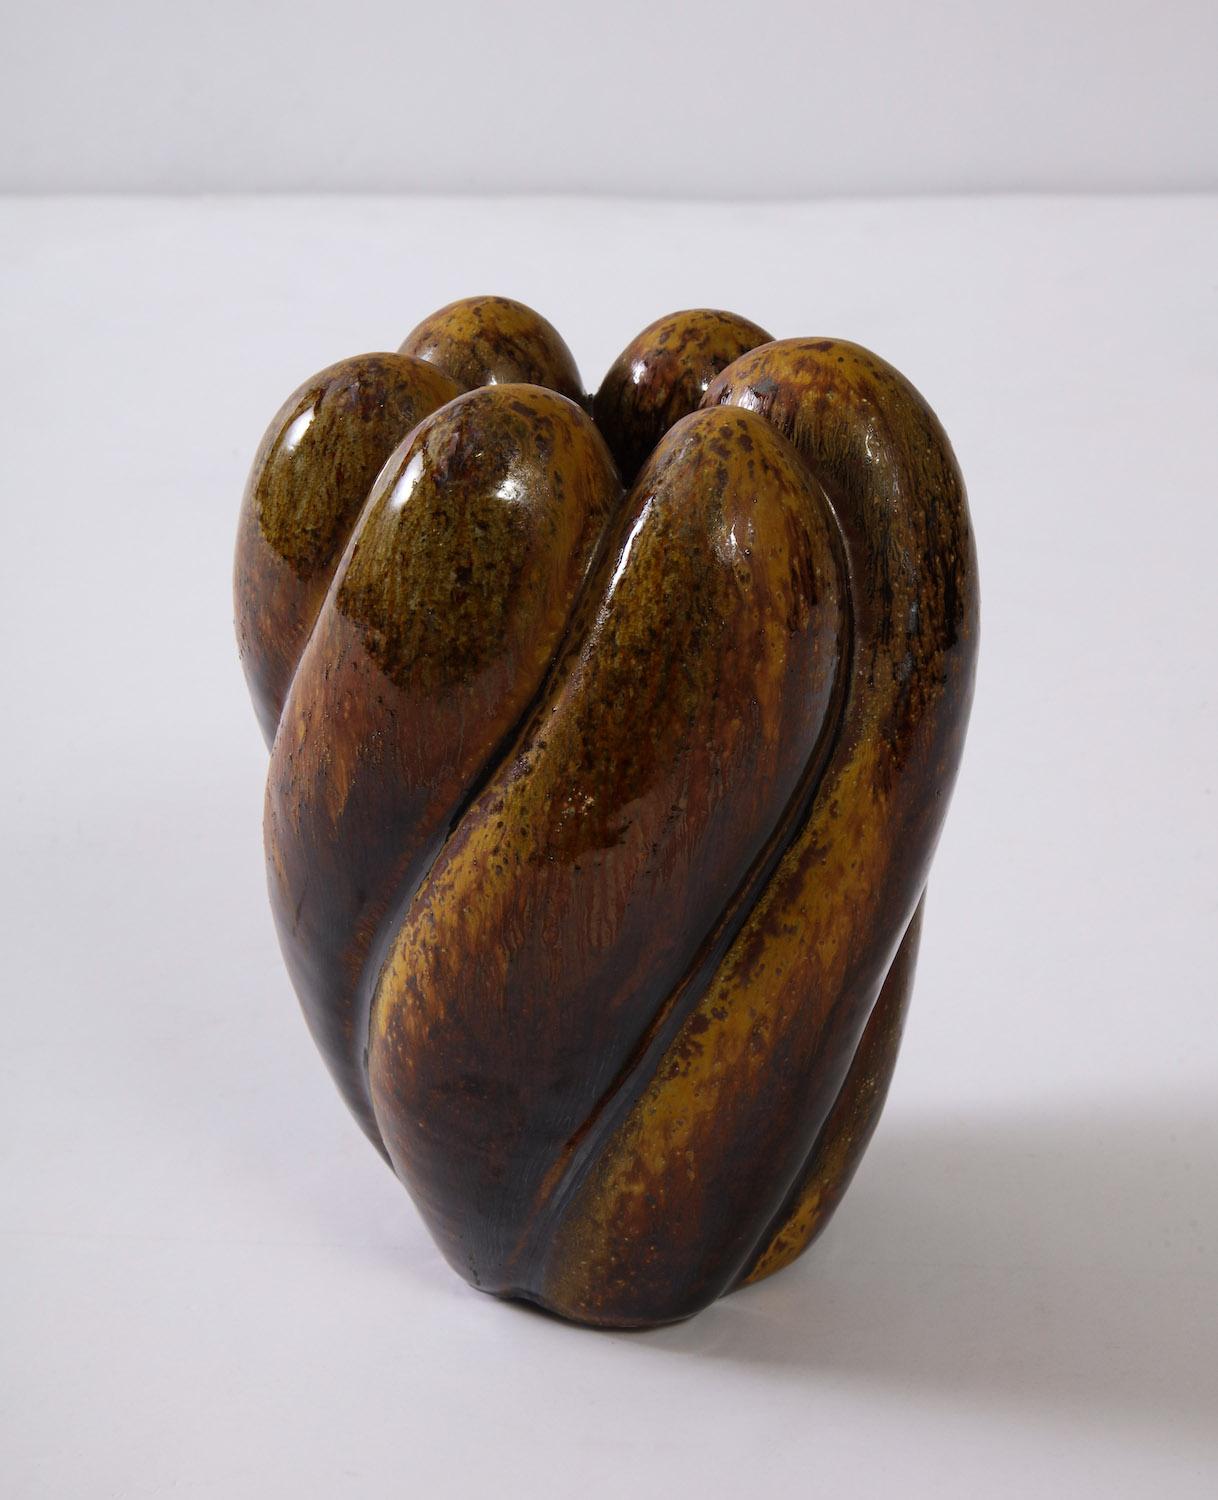 Petite Sculpture #3 by Rosanne Sniderman. Small stoneware sculpture with deep brown glazes. Wood fired and signed on underside.
  